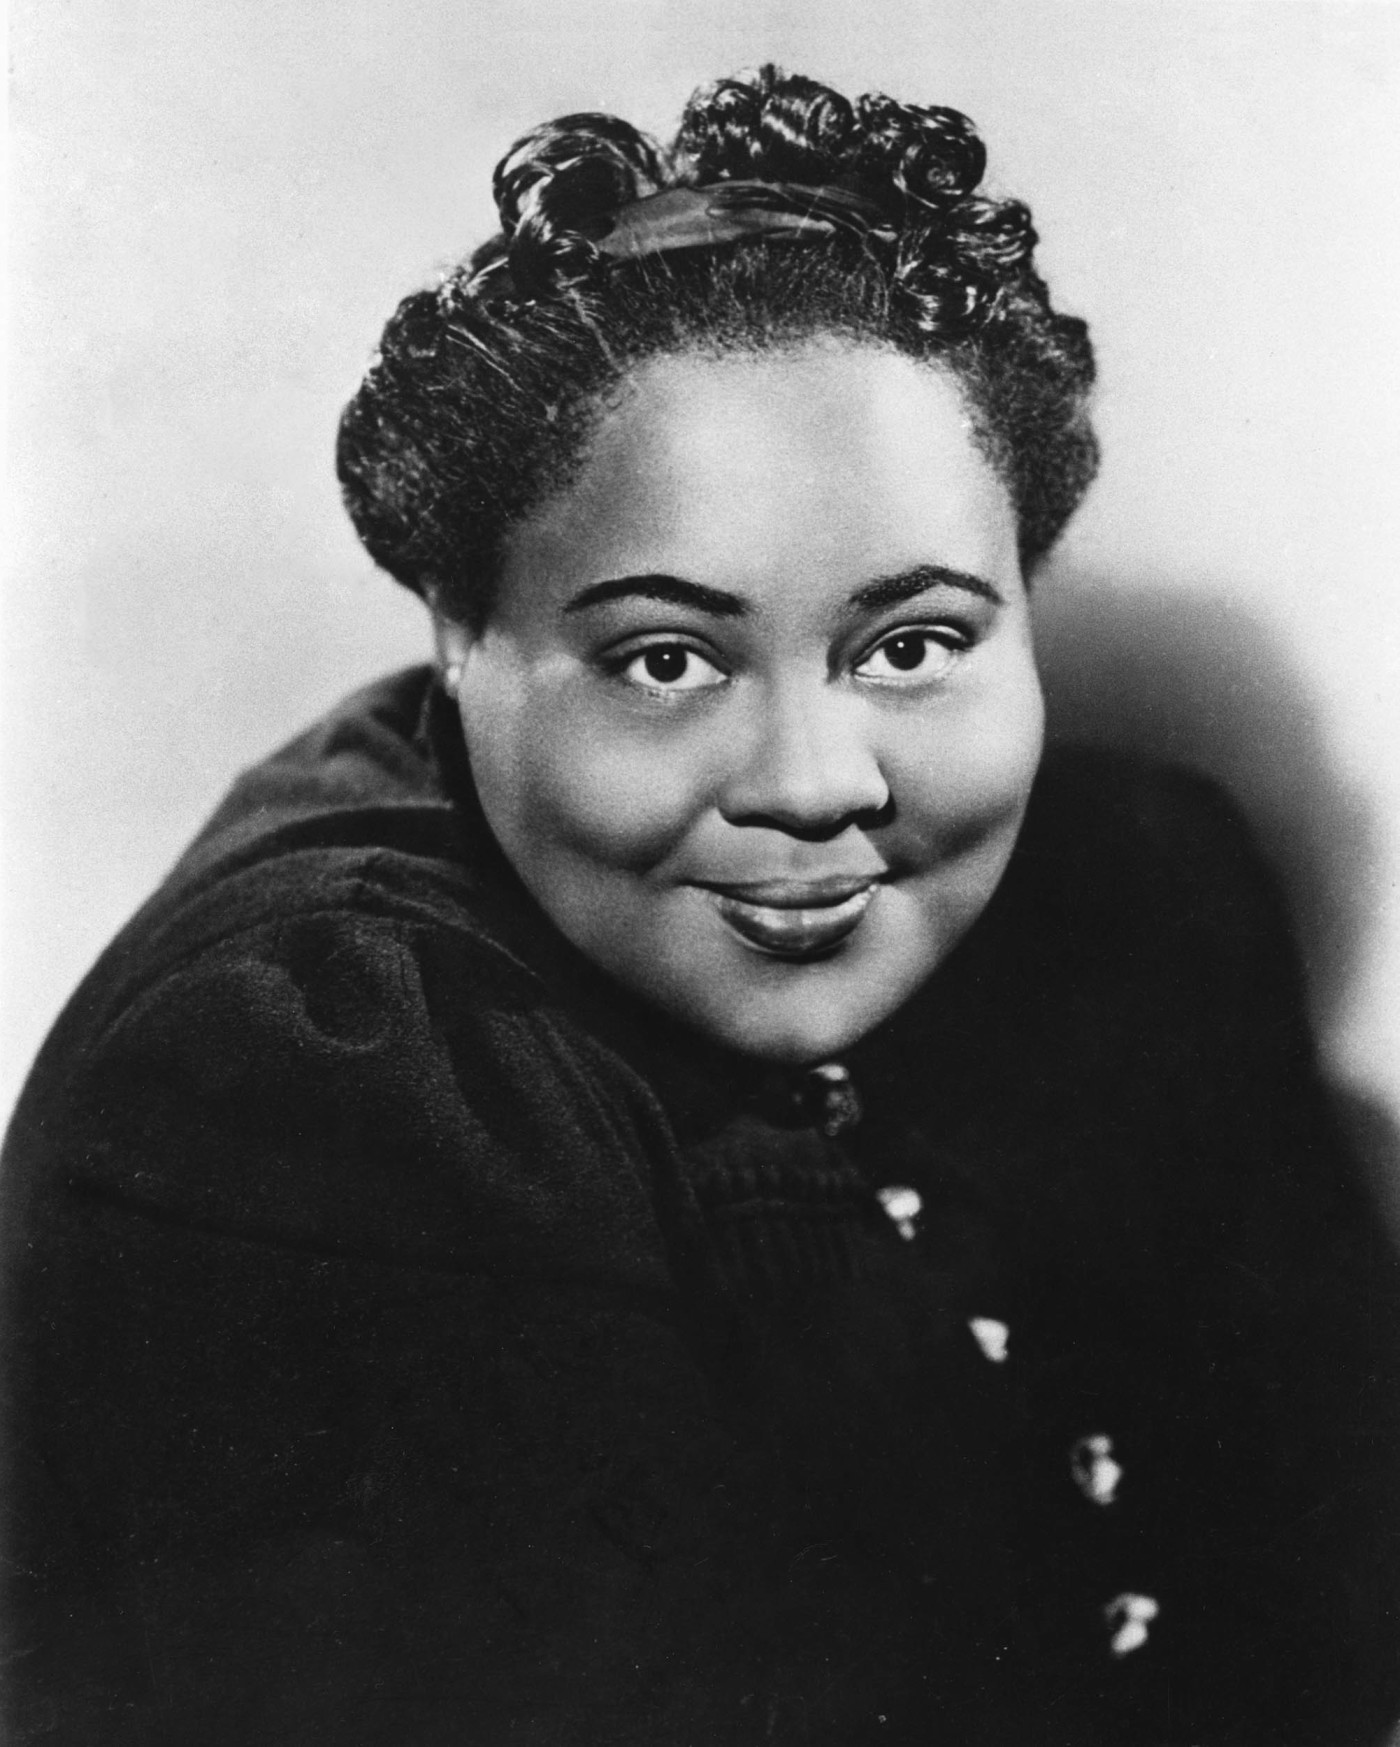 Photograph of Louise Beavers